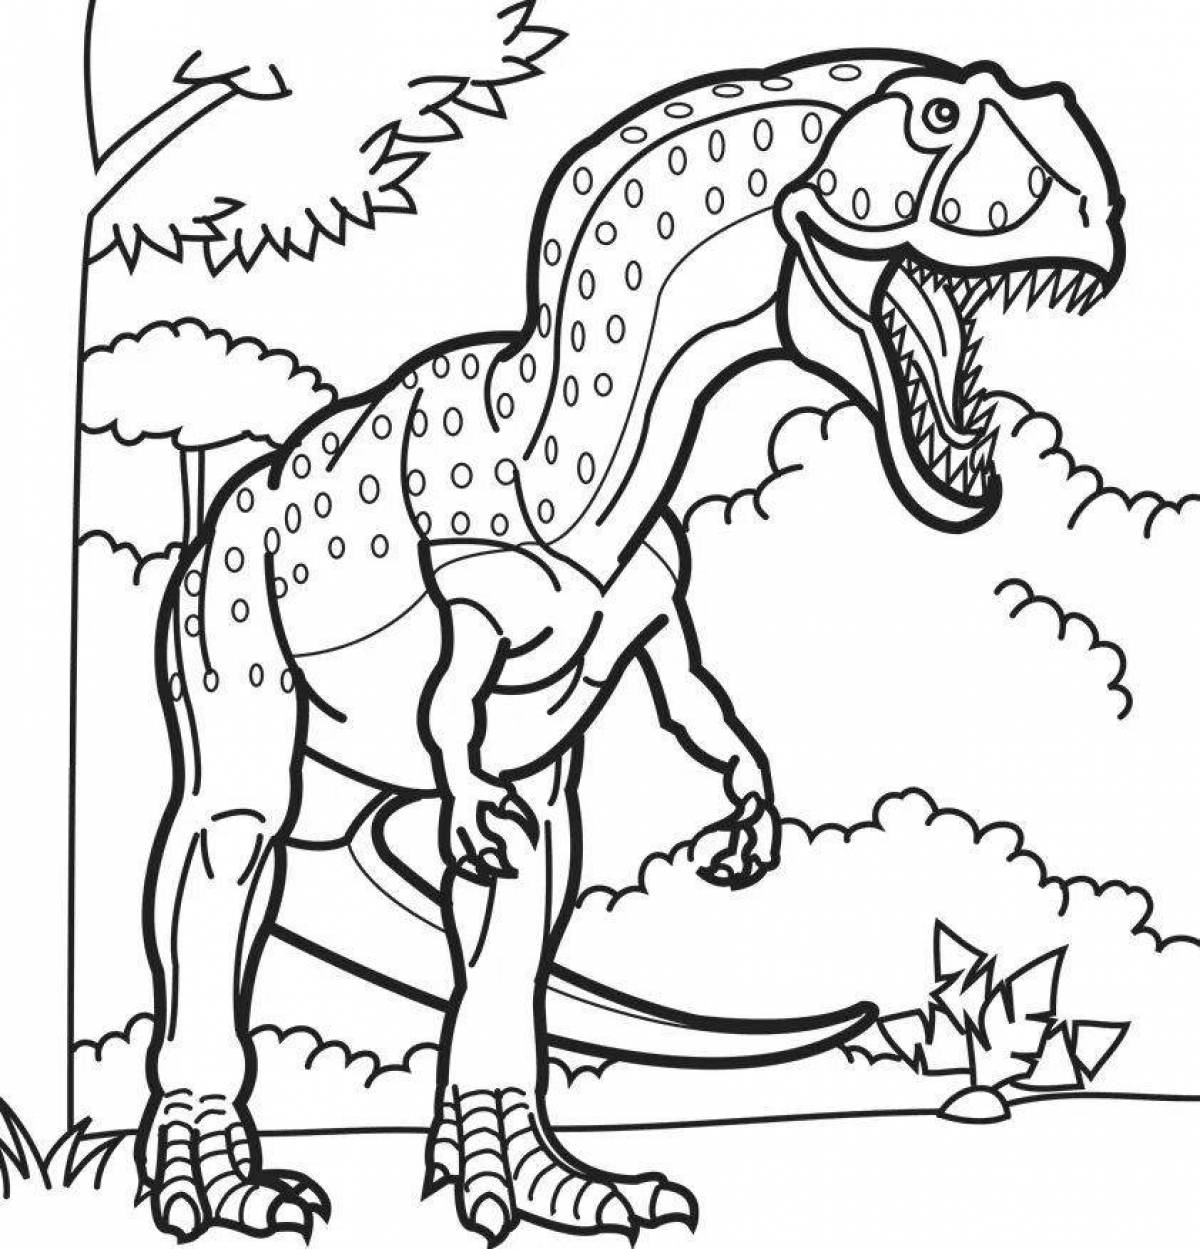 Amazing dinosaur coloring book for 7 year olds